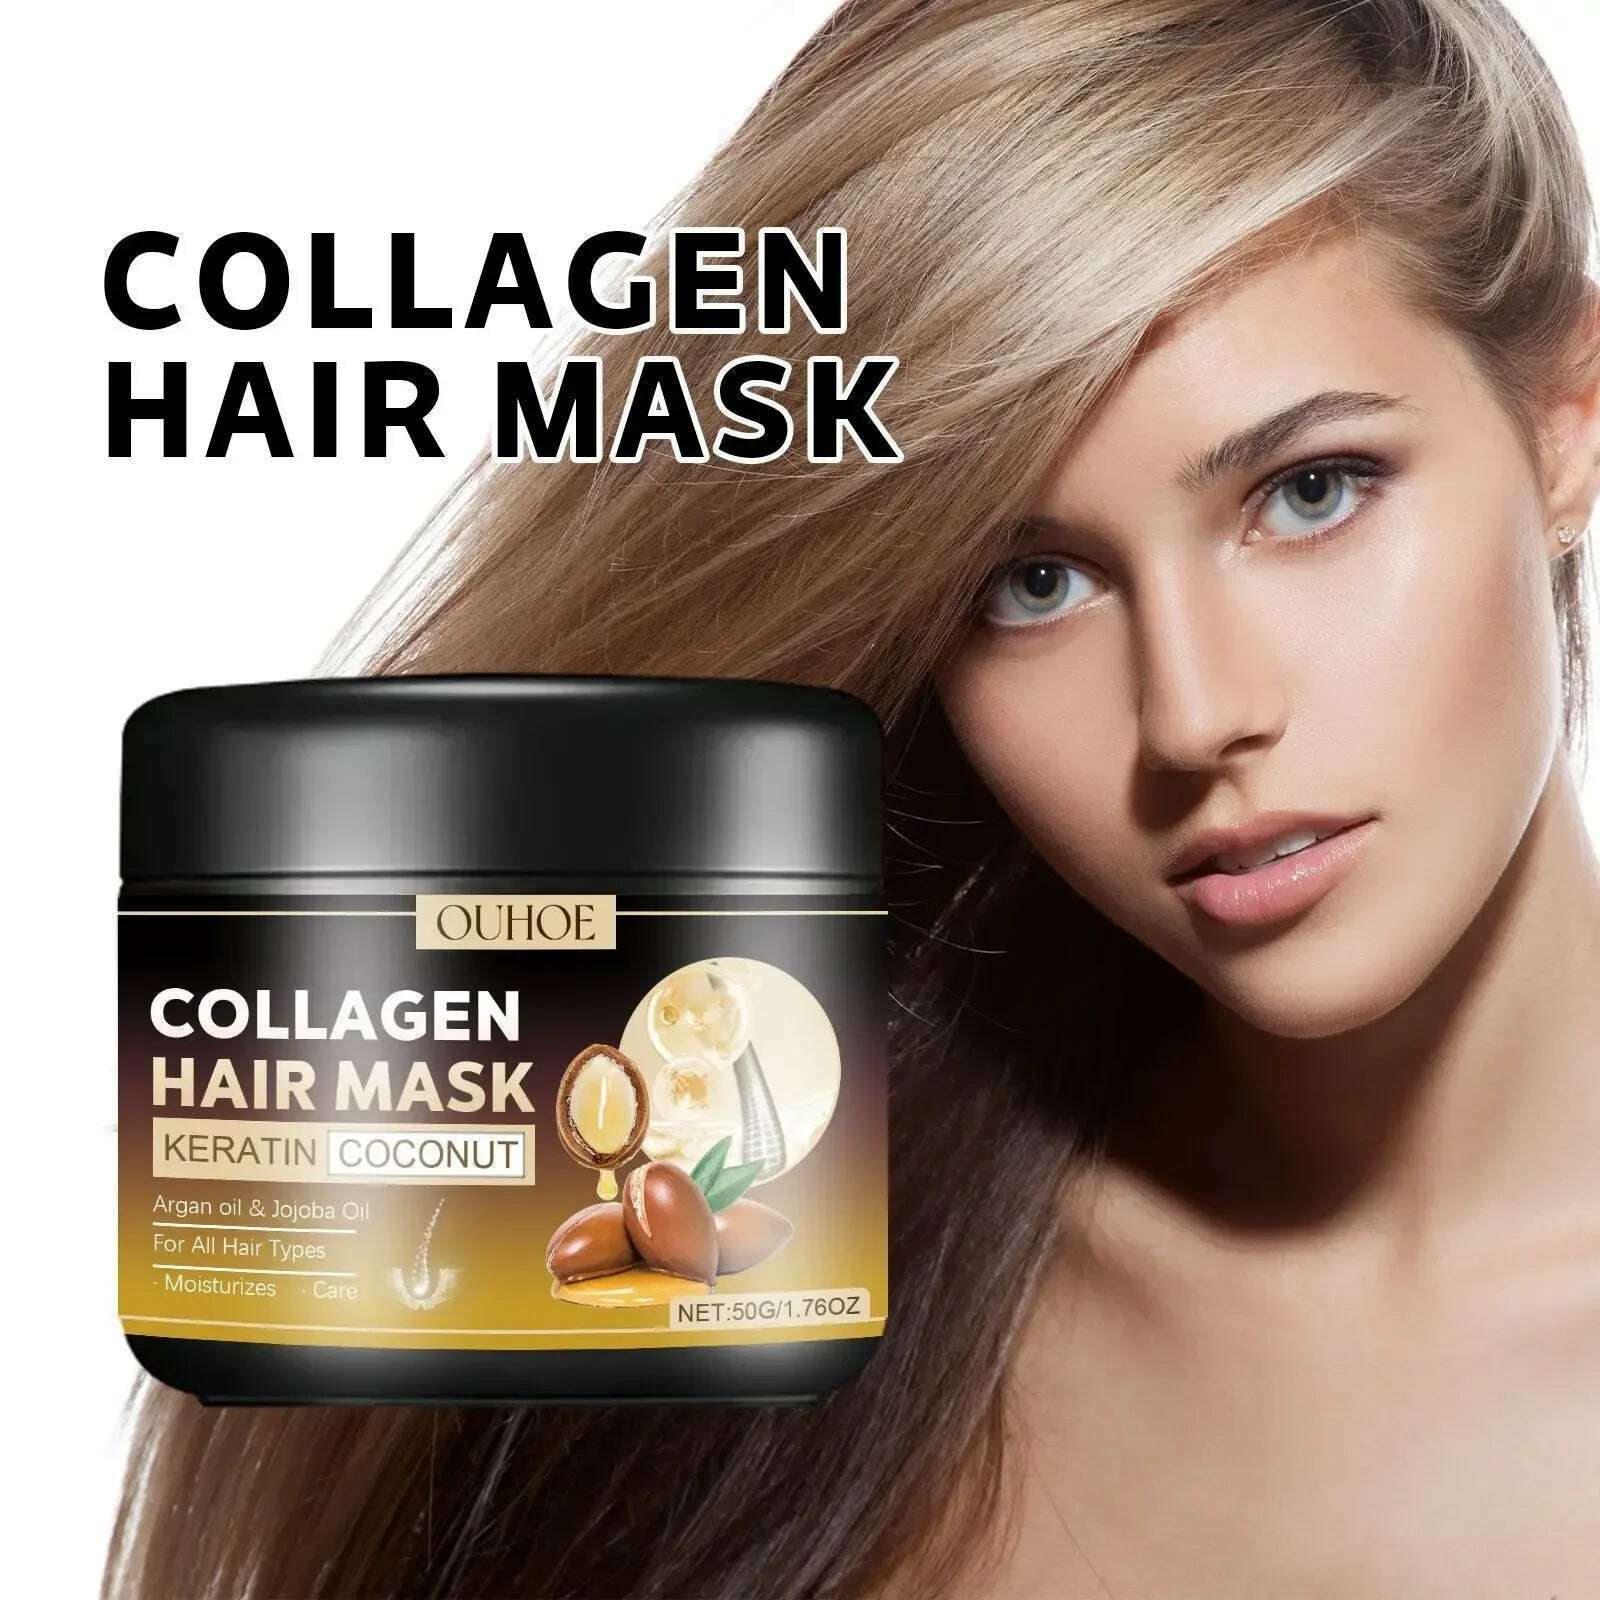 KIMLUD, Маска Для Волос Collagen Hair Mask Keratin 5 Second Repair for Dry and Frizzy Hair Deeply Moisturize and Smooth Hair Conditioner, KIMLUD Womens Clothes